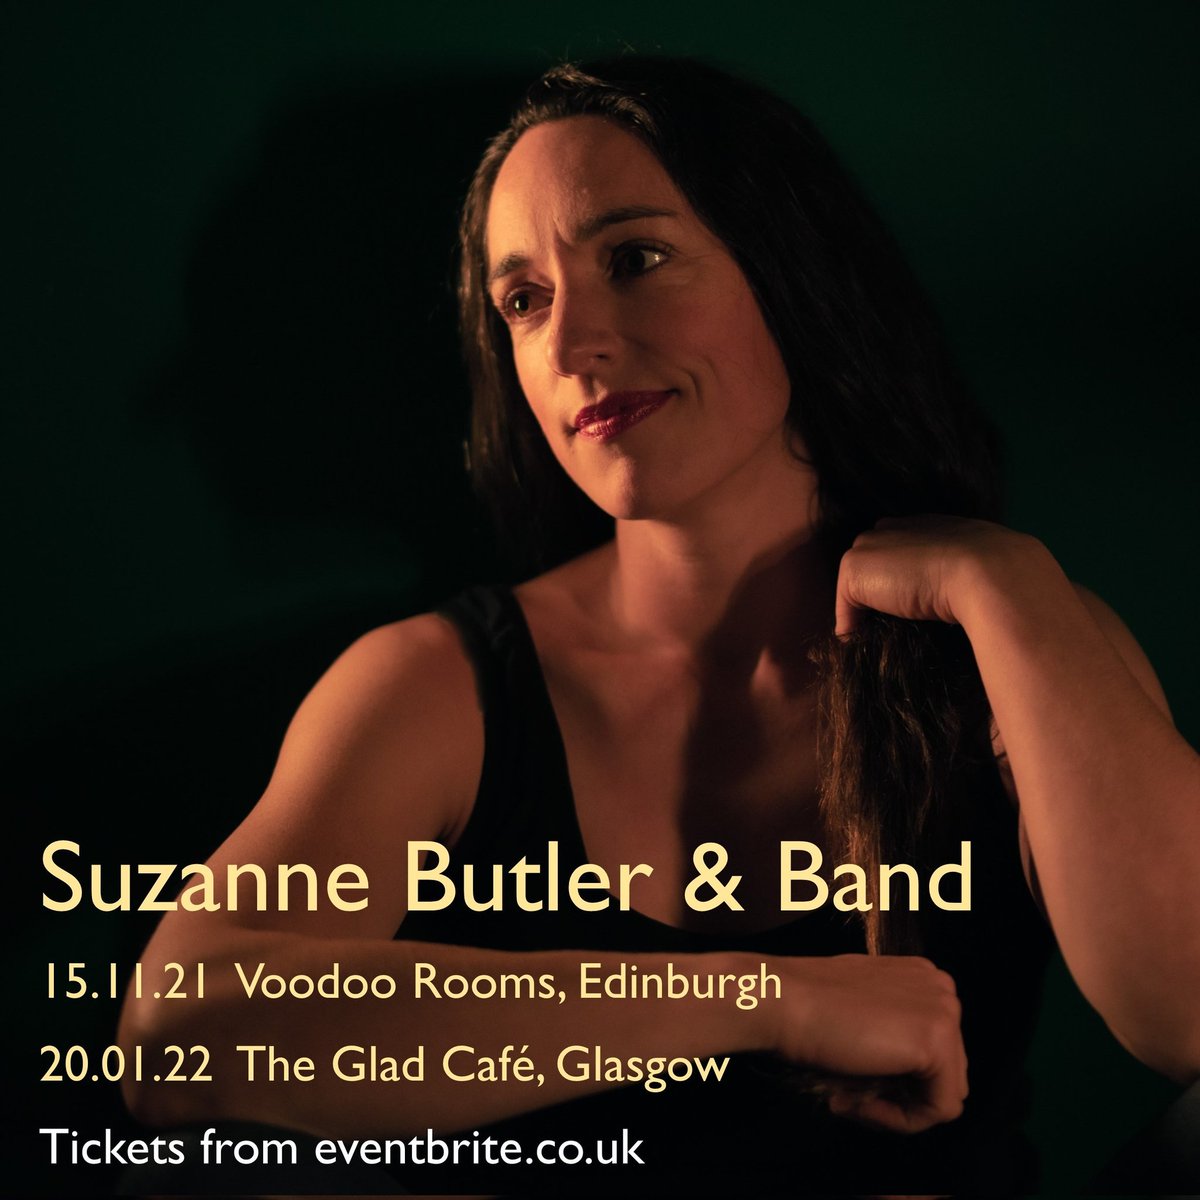 Getting pretty excited about this. Band practise on Thursday night... Can't wait to hear the guys in action again at long last! Tickets limited for these gigs, so get them soon if you're coming 😀 #suzannebutler #livemusic